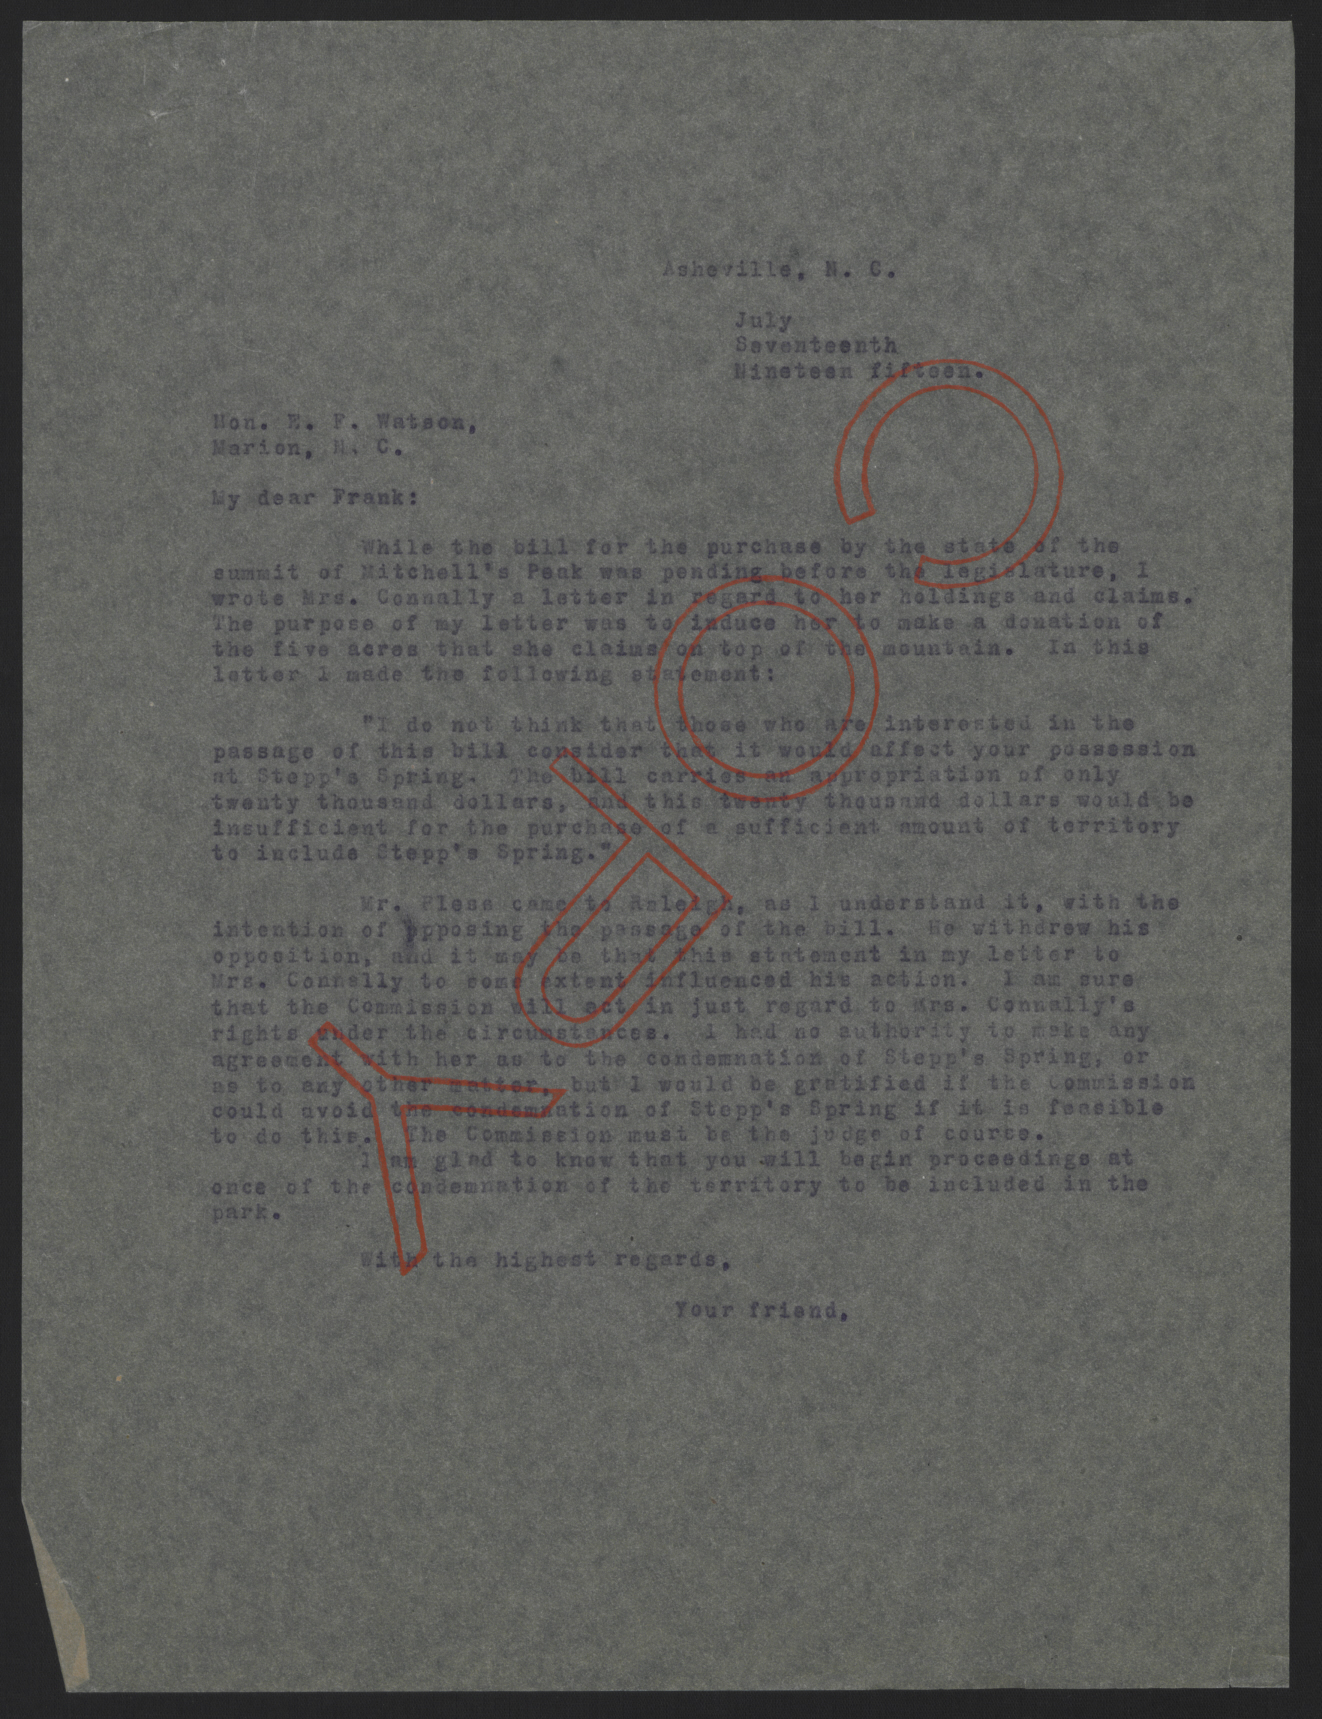 Letter from Craig to Watson, July 17, 1915